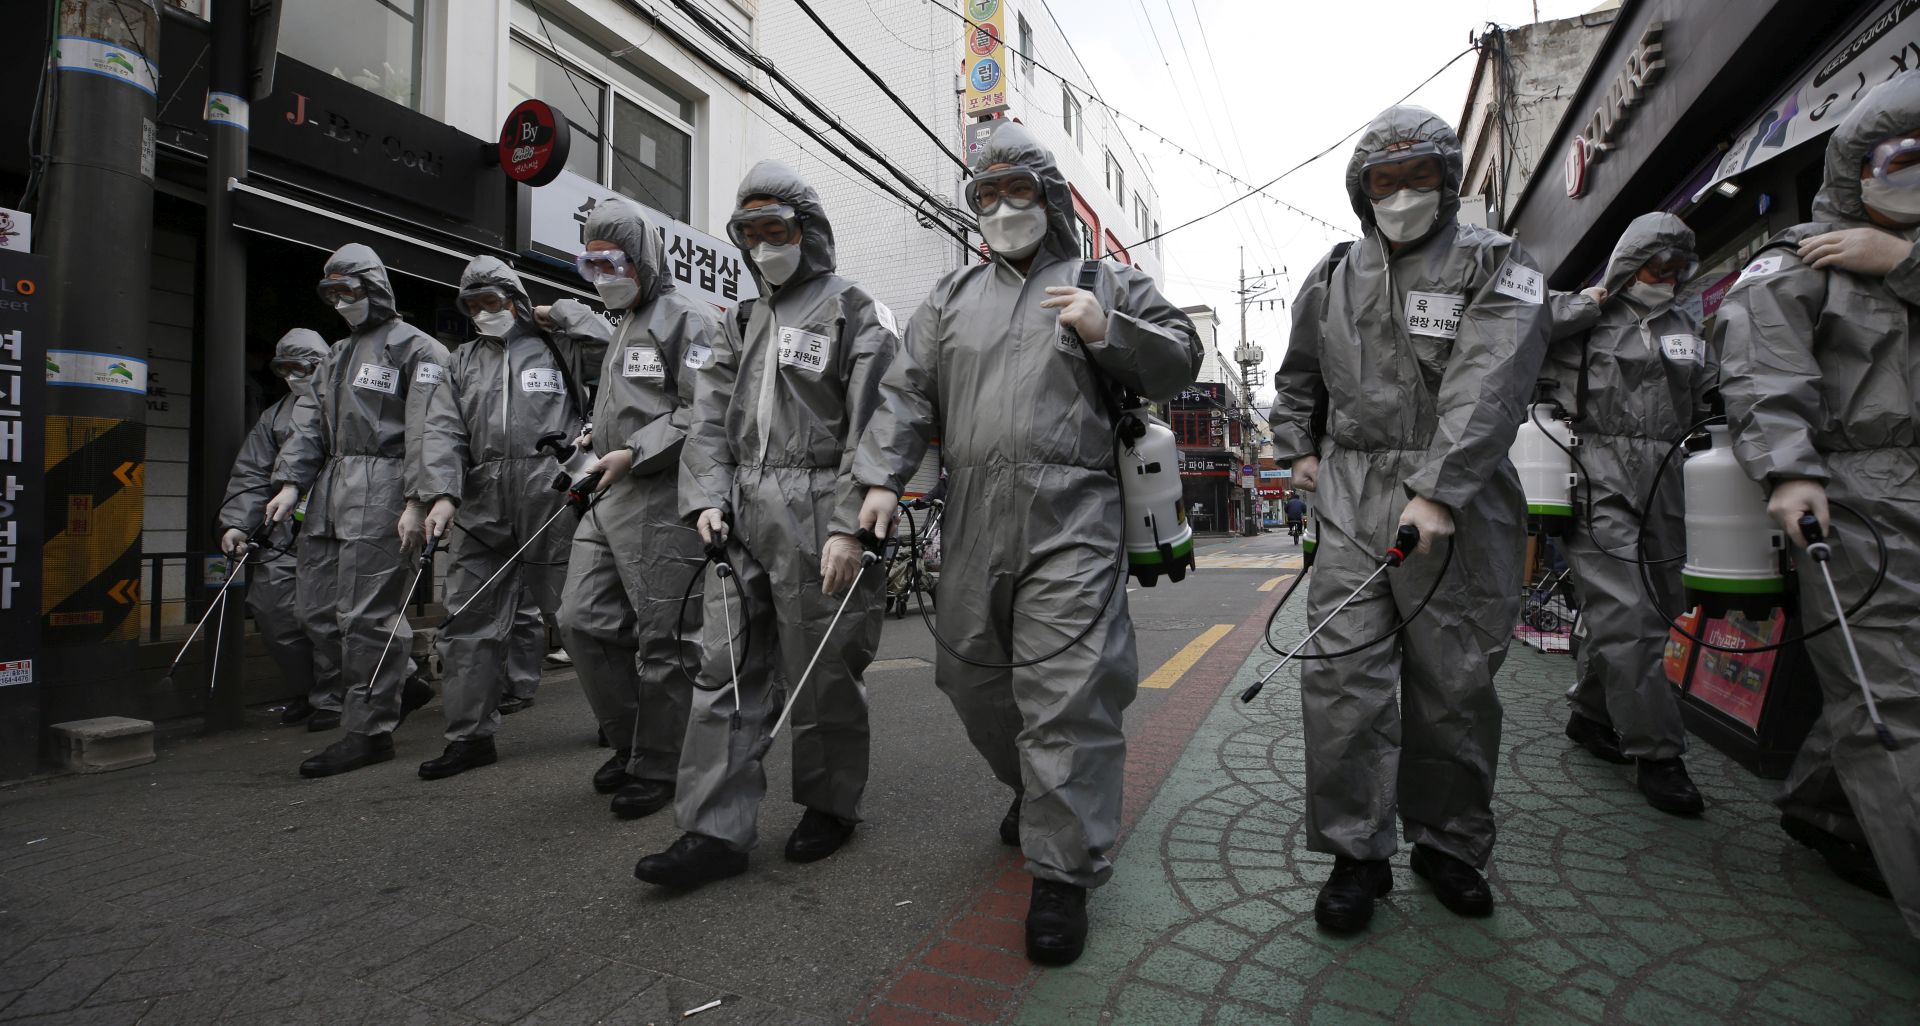 epa08268351 South Korean soldiers spray disinfectant in the street as a precaution against the spread of the novel coronavirus, in Seoul, South Korea, 04 March 2020. With over 5,000 cases of coronavirus reported, South Korea currently accounts for the largest number of infections outside mainland China.  EPA/JEON HEON-KYUN